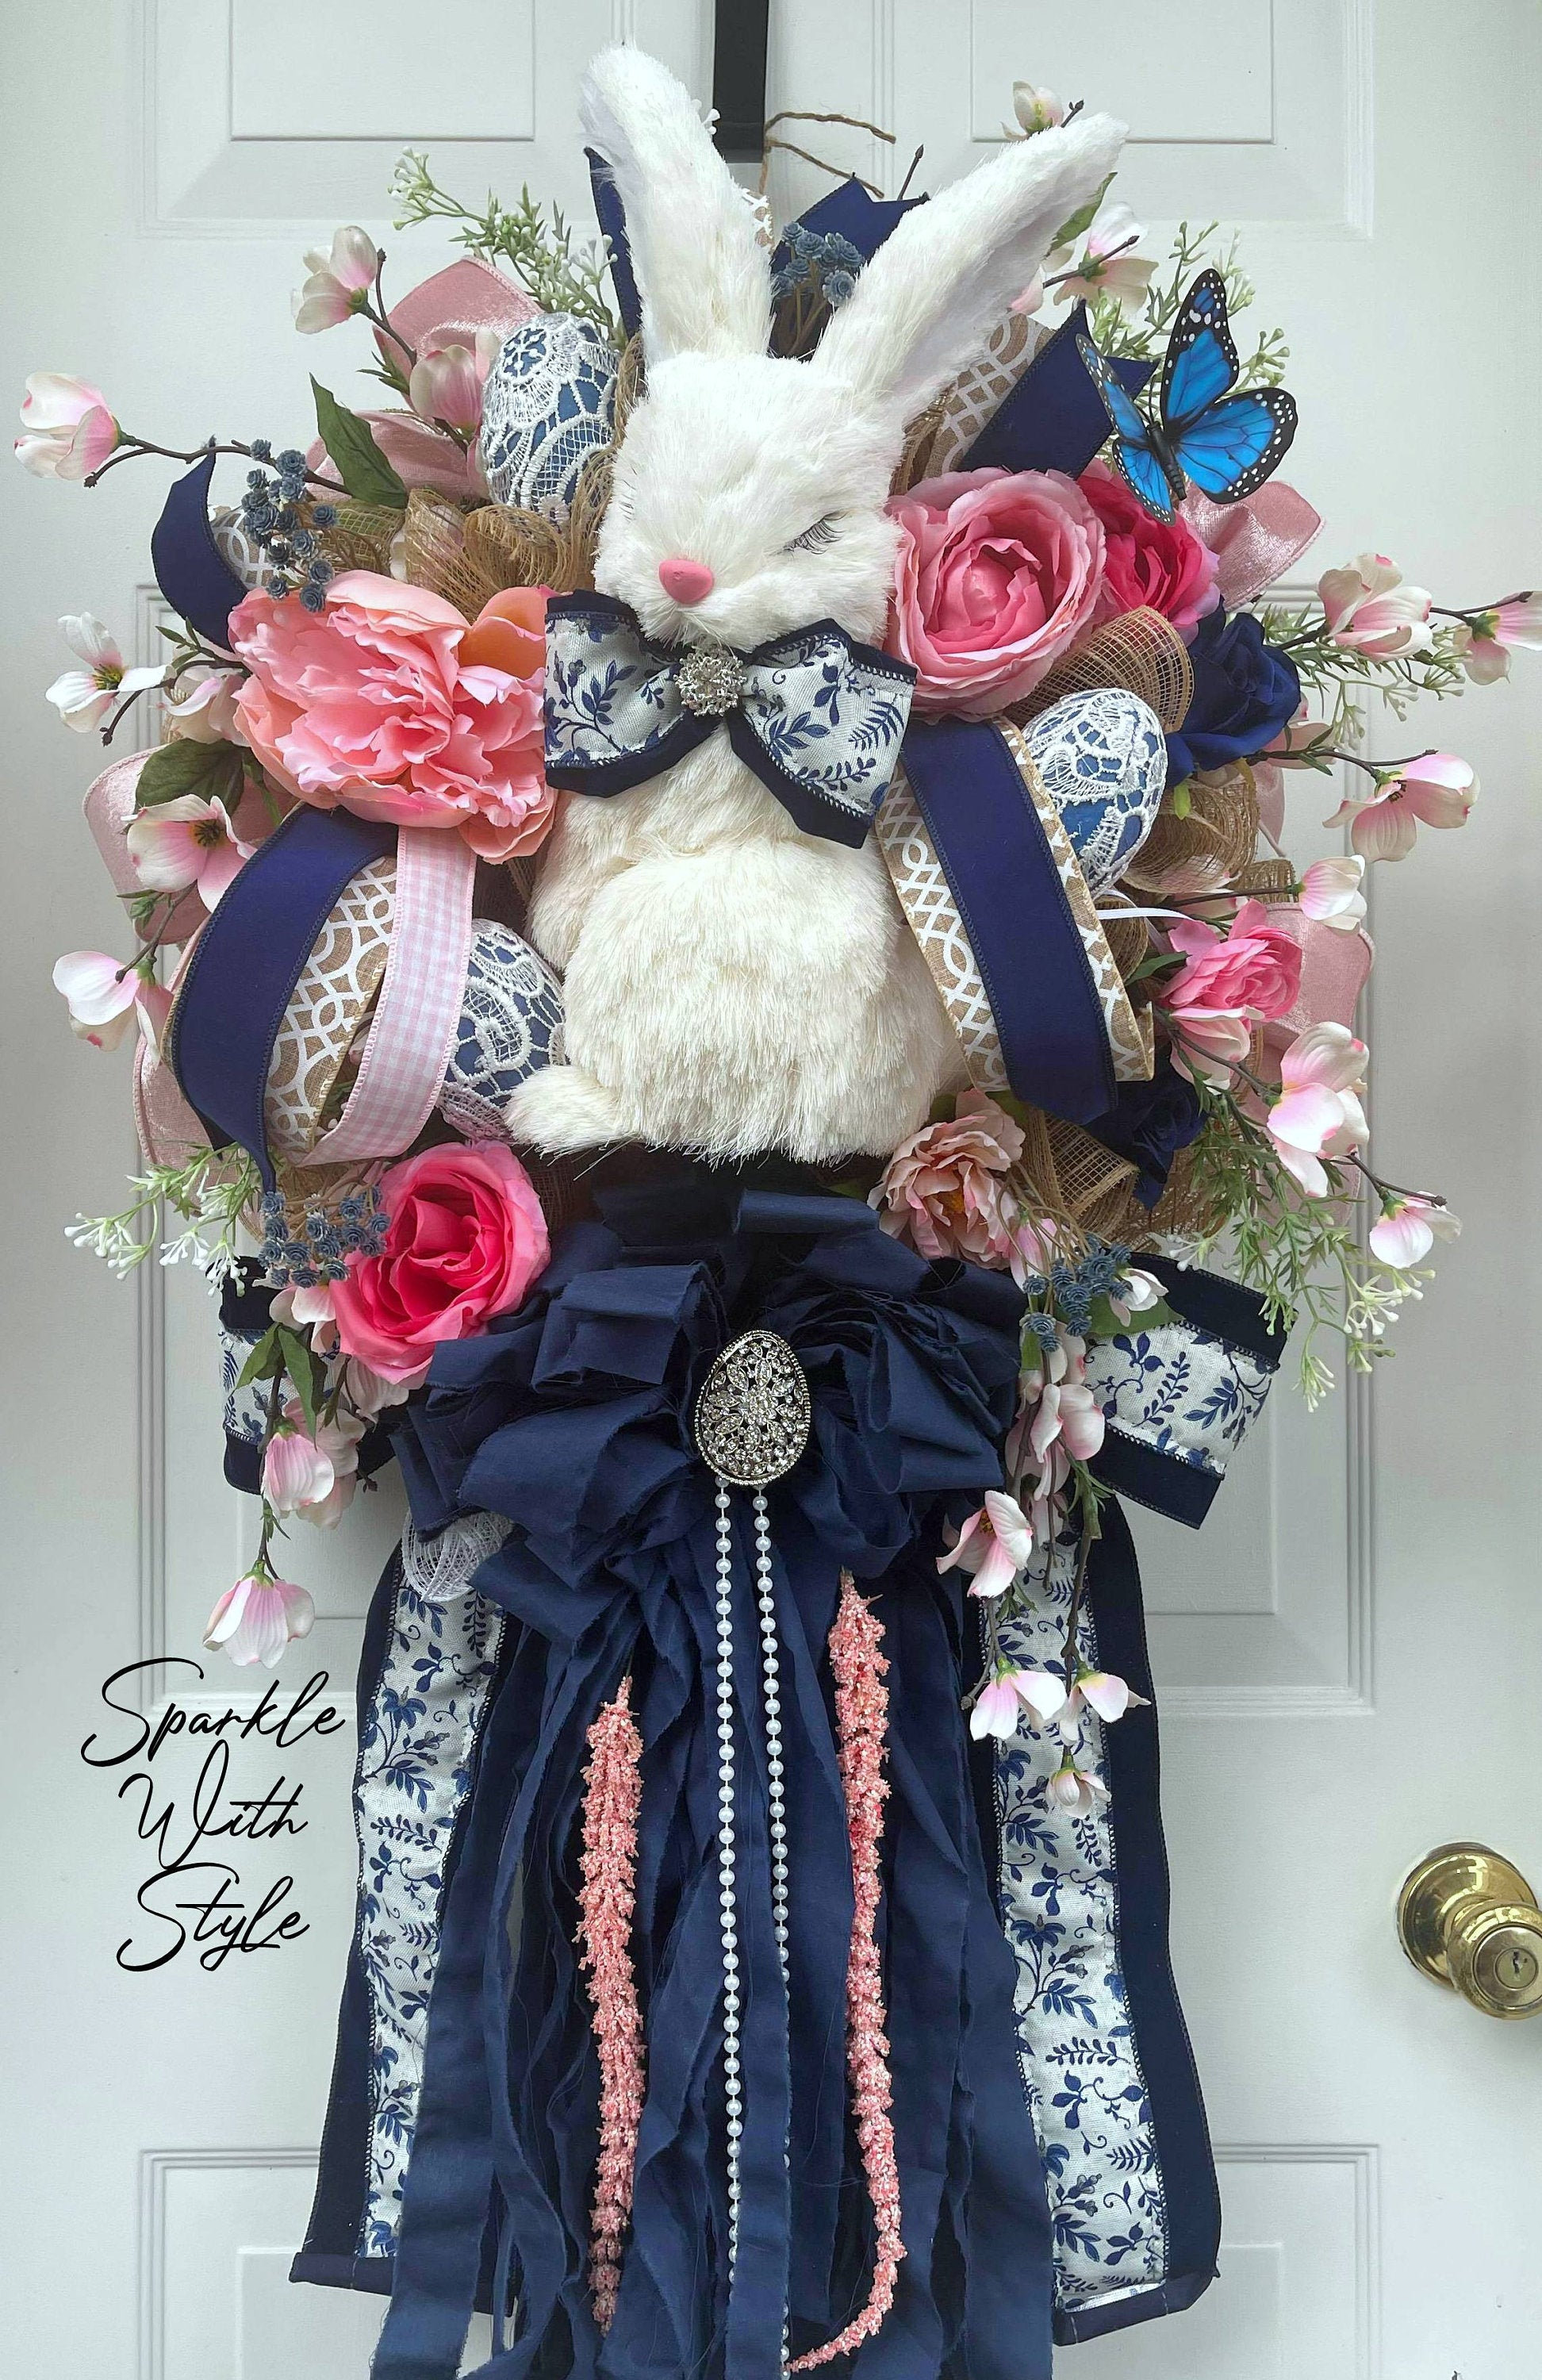 Easter Decor Door Decor Easter Swags Easter Wreath Easter Bunny Wreath Easter Decorations